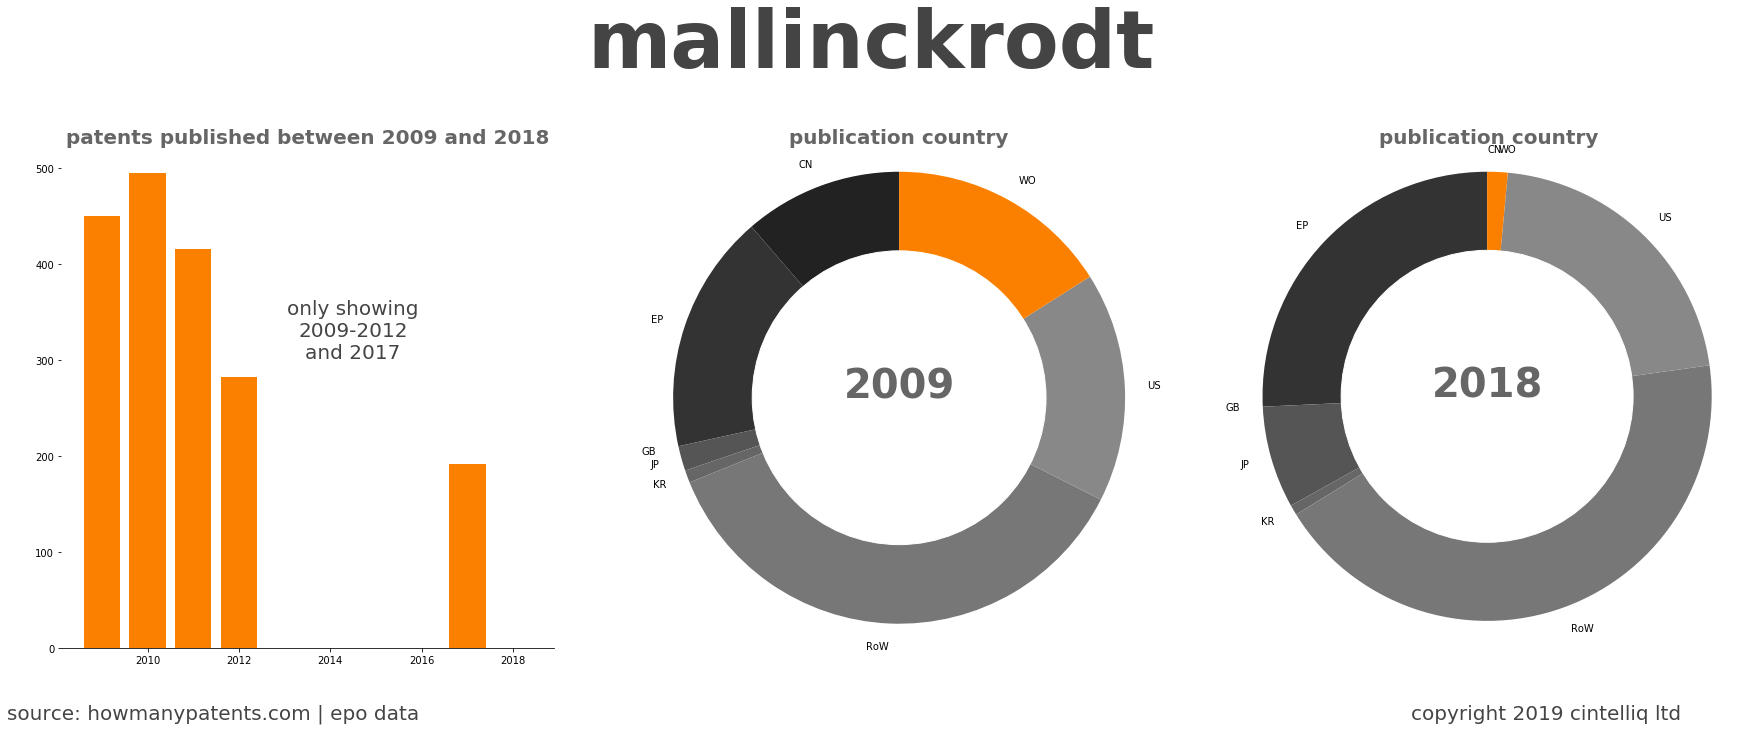 summary of patents for Mallinckrodt